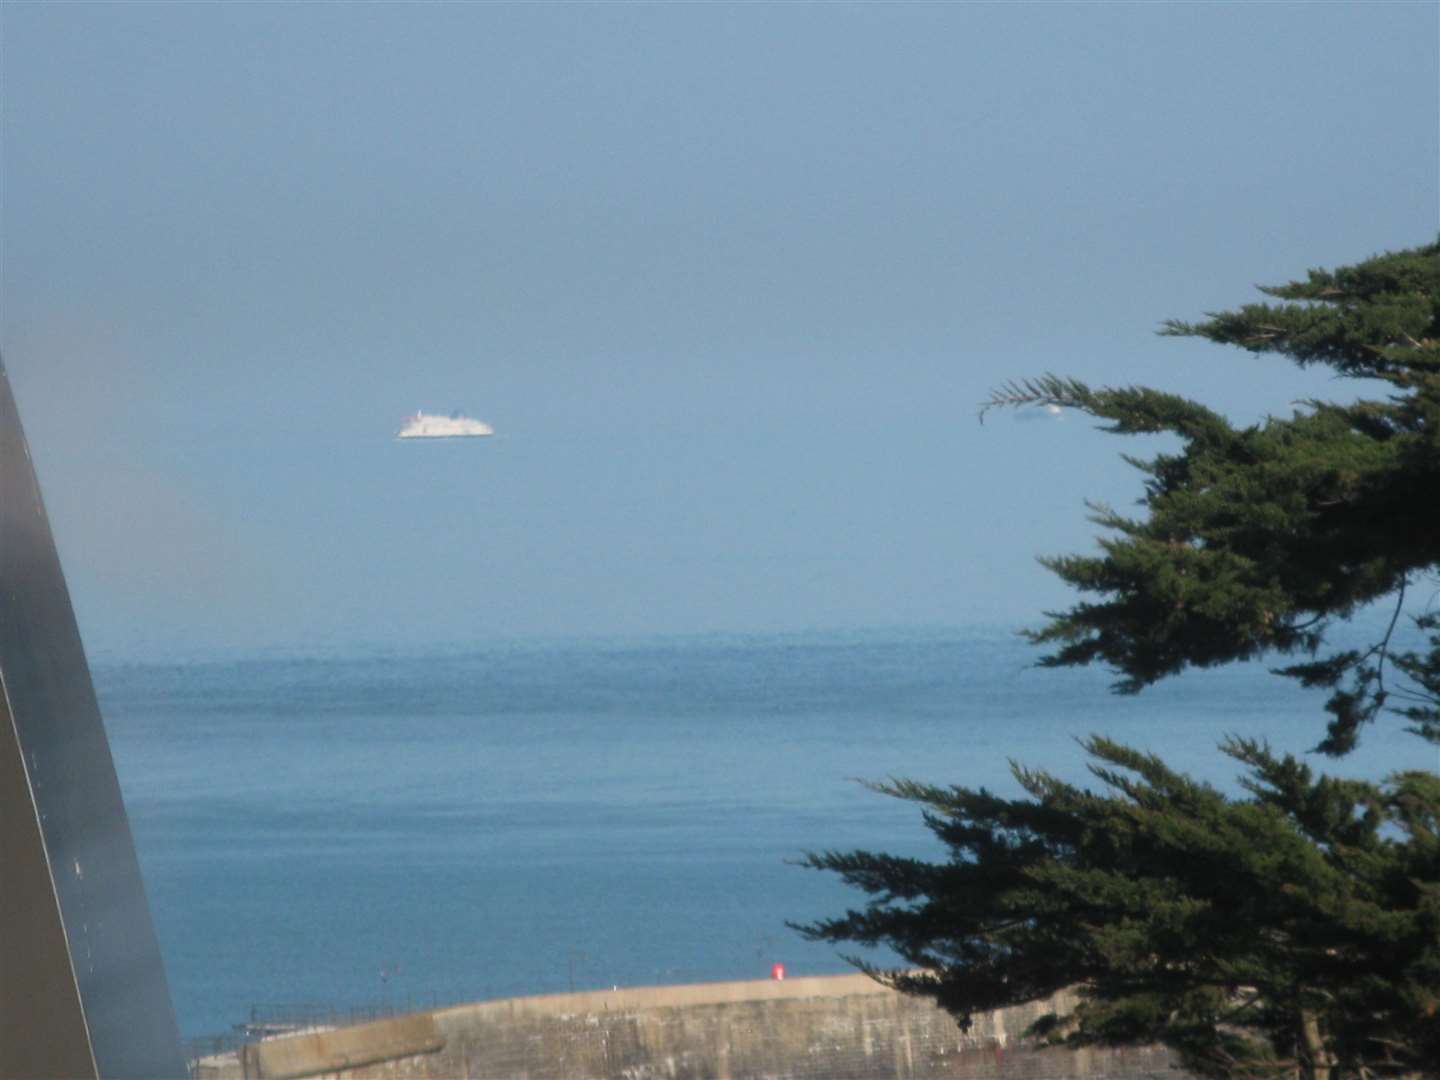 Pat Cocks took this photo of what appears to be a 'floating ship' in Folkestone. A second ship can also be seen behind the tree